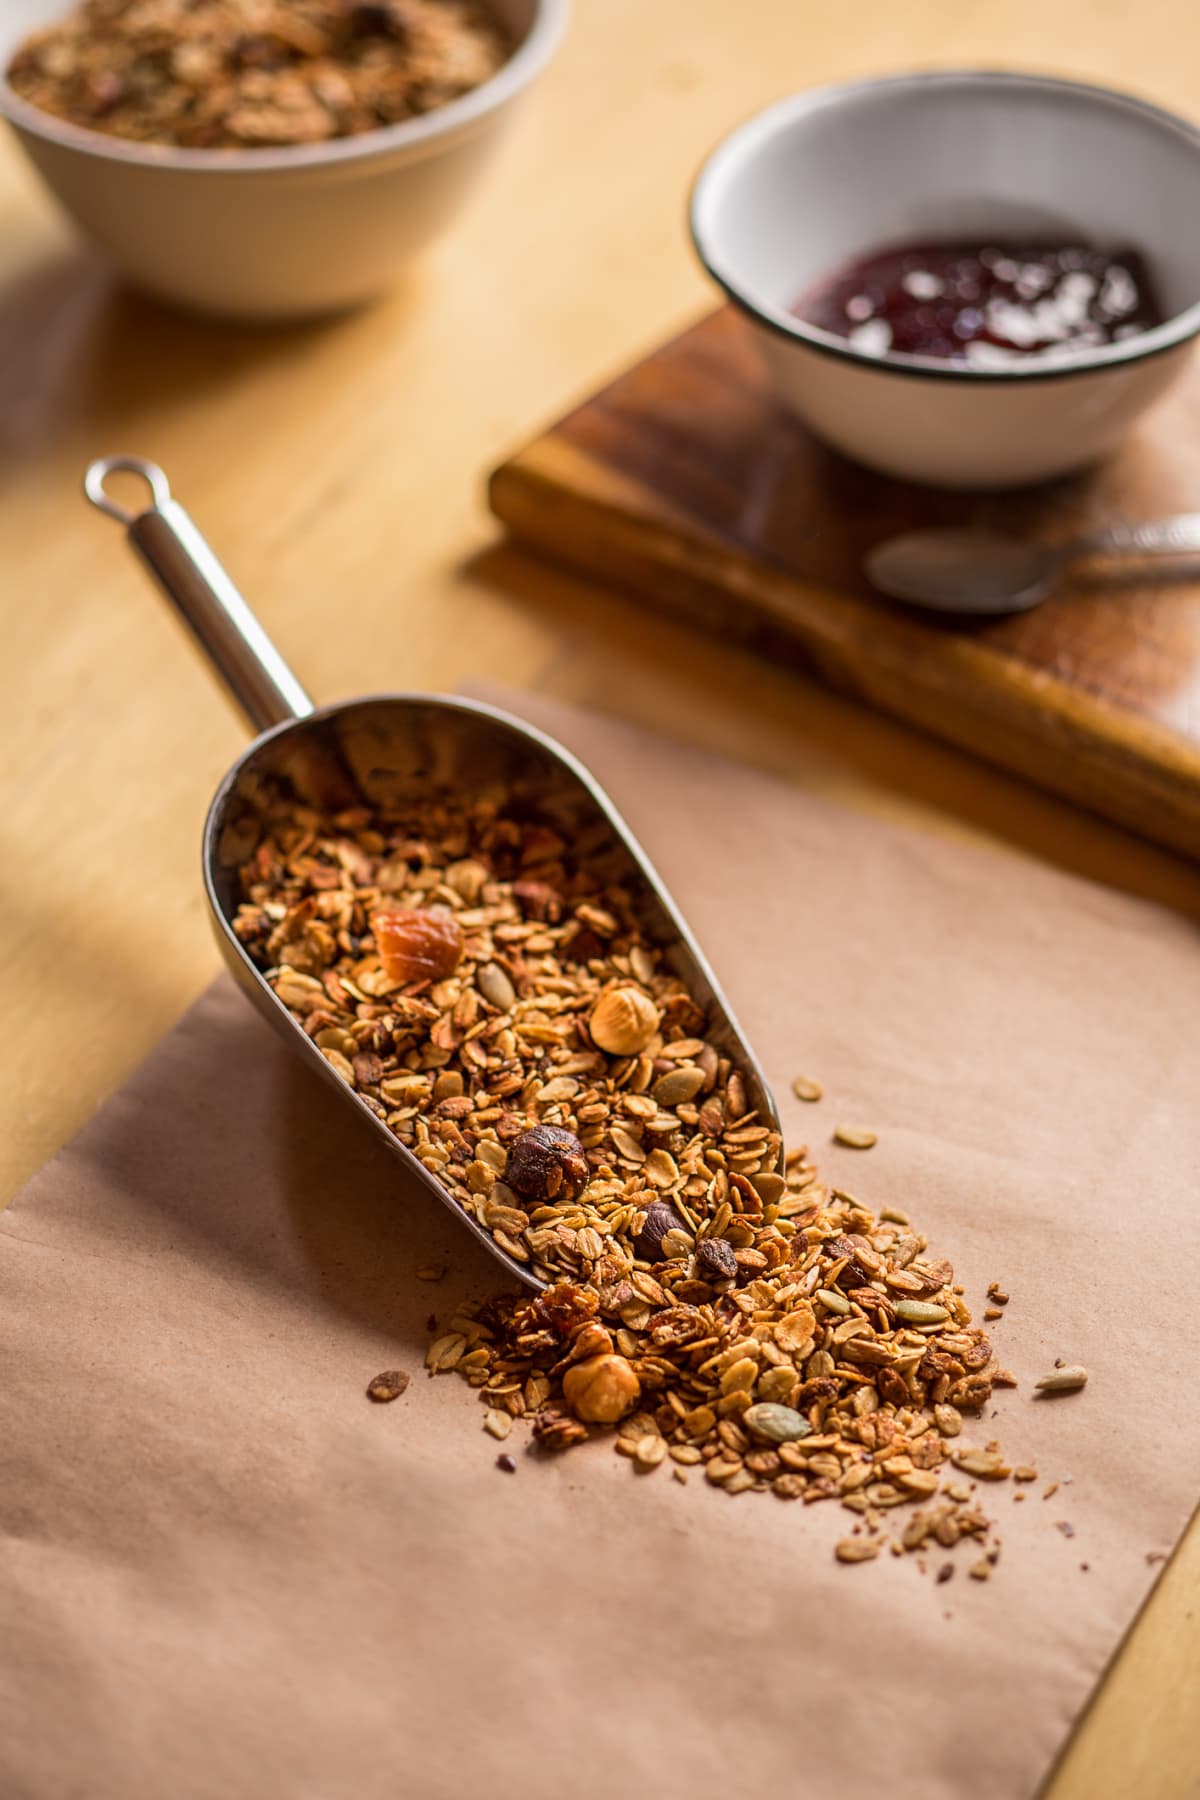 Scoop of healthy and delicious granola made out of oat, nuts, seeds, and dried fruits